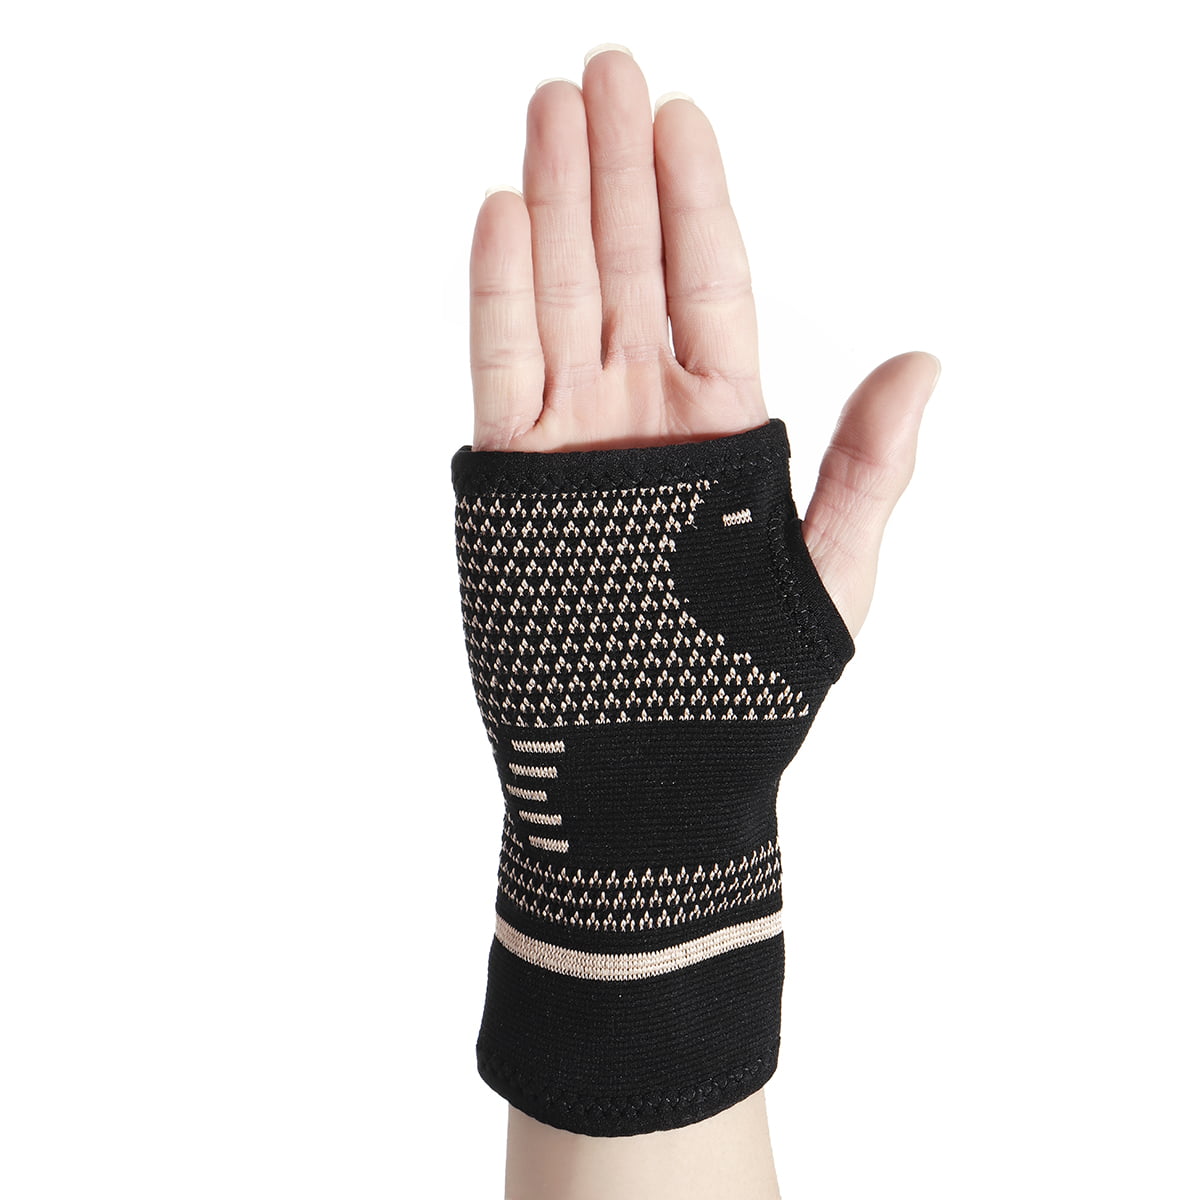 Cubital Tunnel Wrist Brace Sleeve for Men and Women by Copper Compression Gear Support Recovery Tendonitis Relief for Carpal Tunnel 1 Sleeve - Fits Both Hands Wrist Sprains Arthritis RSI